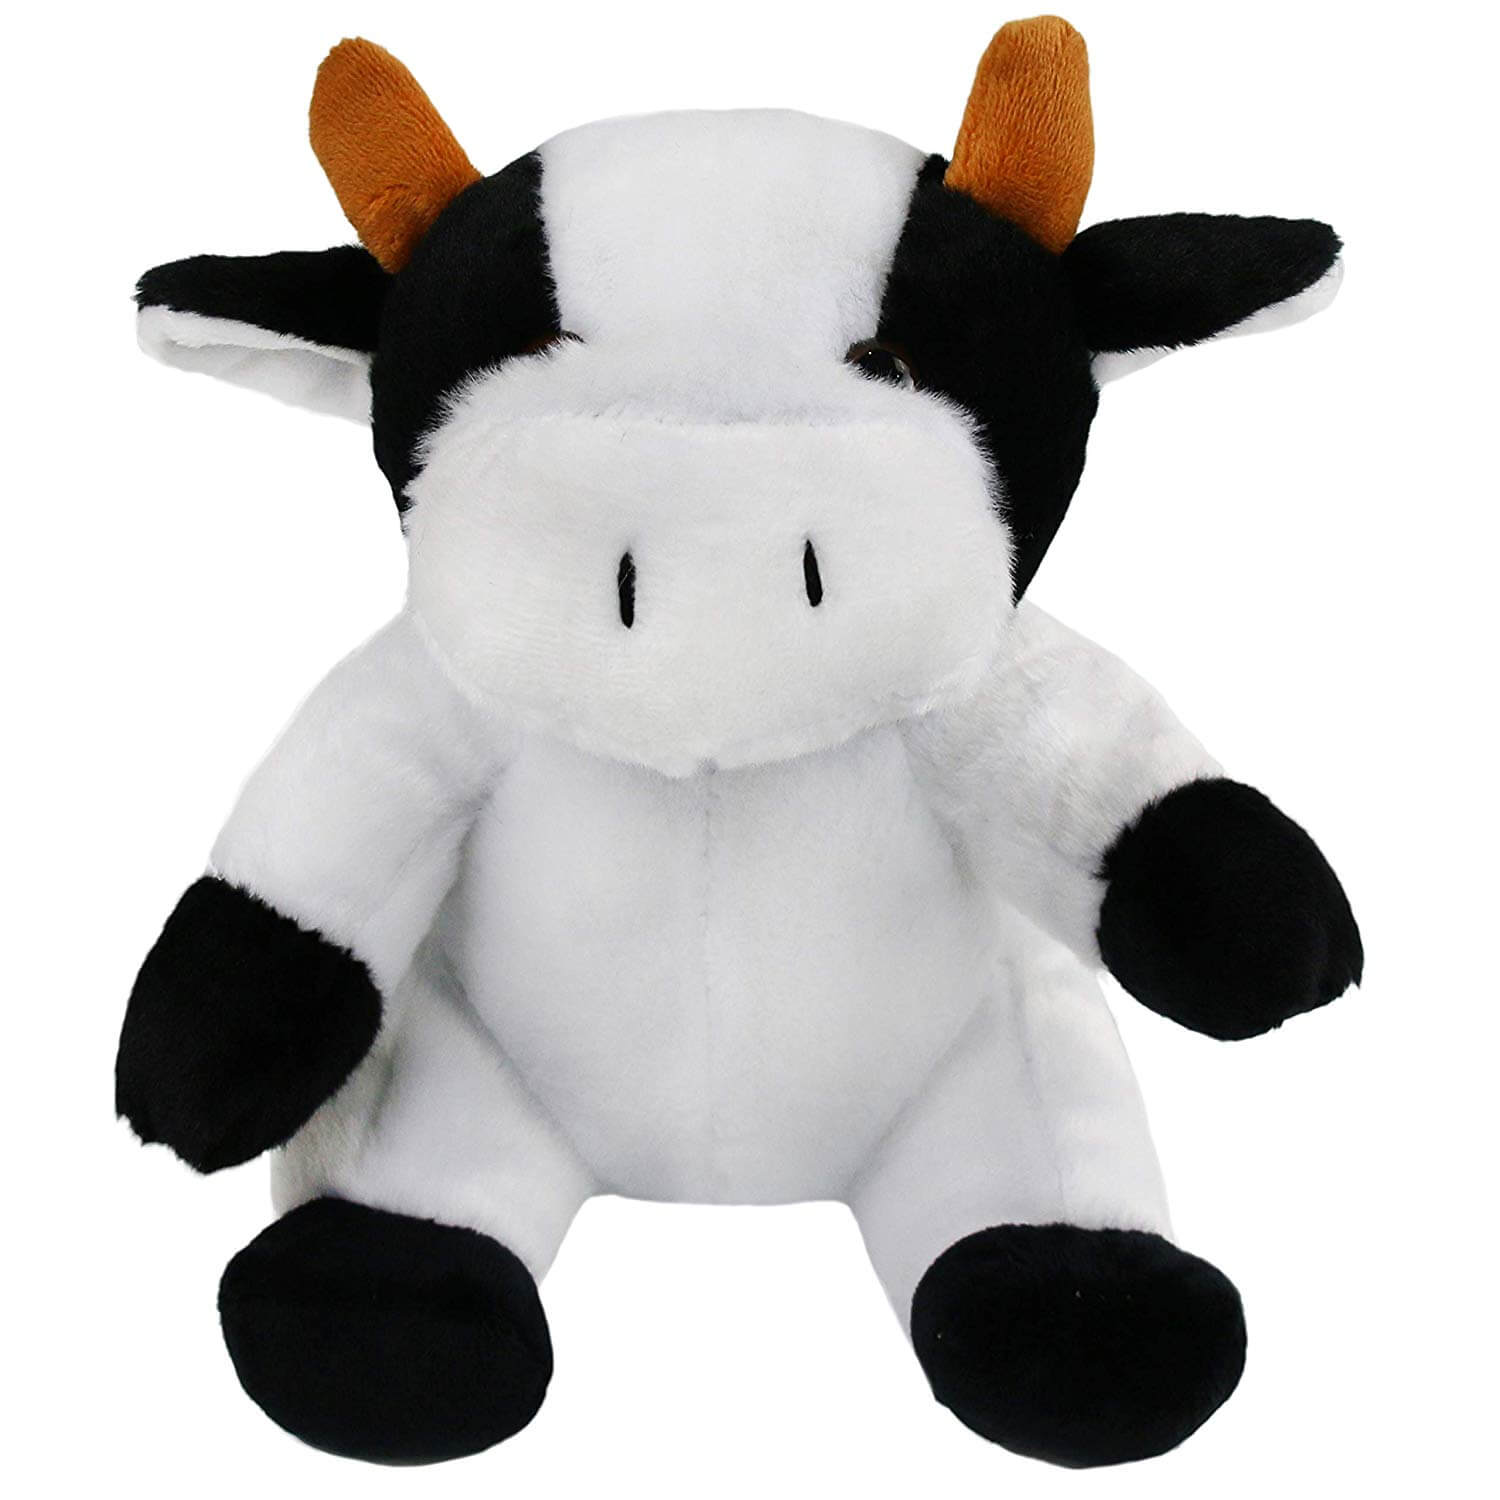 light up dairy stuffed cattle plush toy, 9'' | Bstaofy - Glow Guards